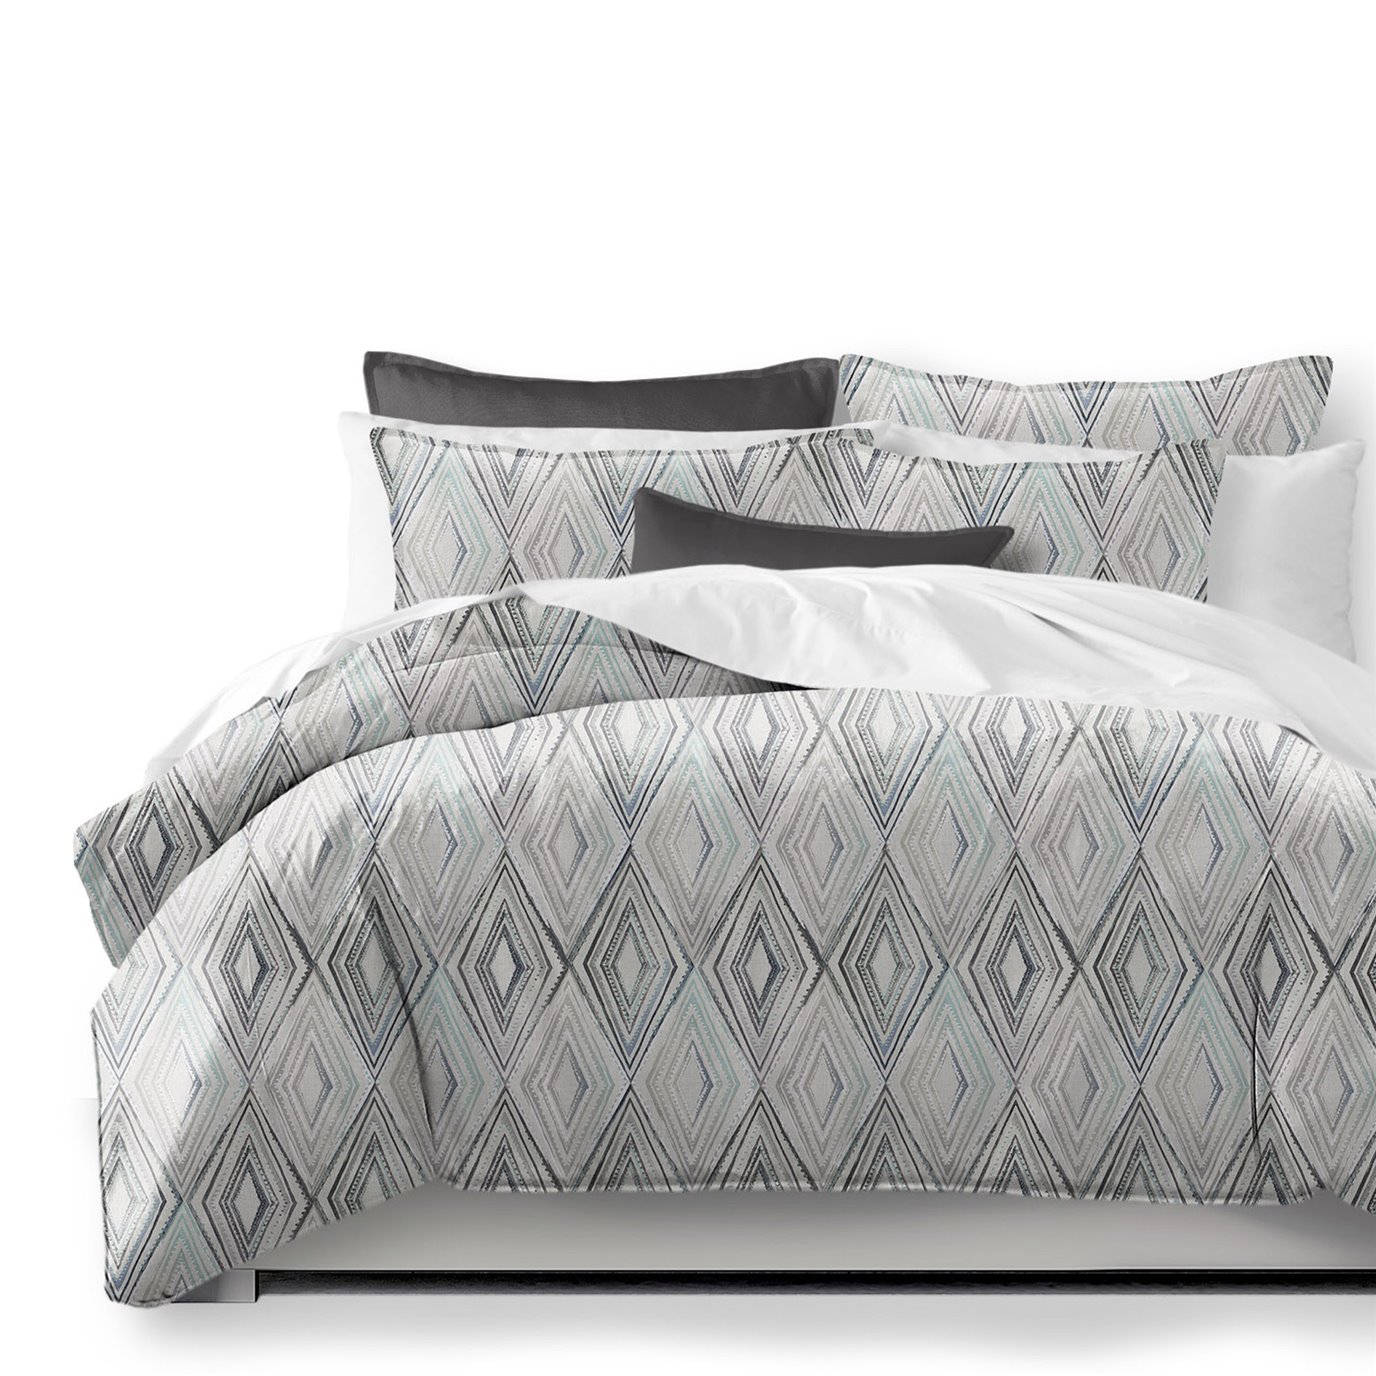 Sloane Seabreeze/Ivory Comforter and Pillow Sham(s) Set - Size Super Queen